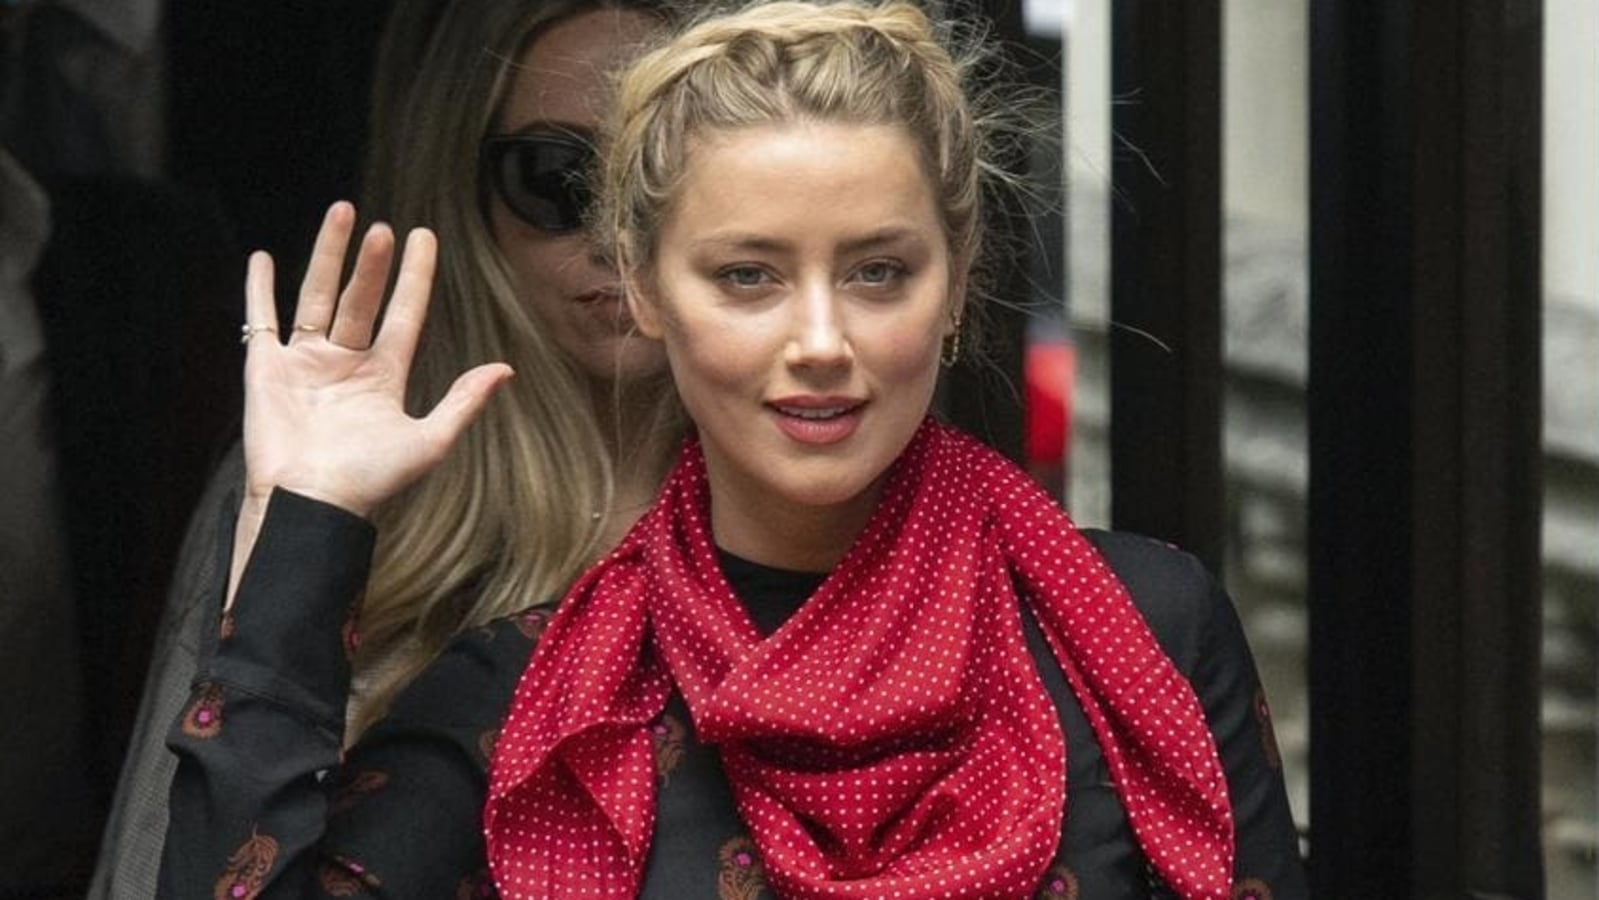 You are currently viewing Amber Heard has ‘world’s most beautiful face’ according to science, says report